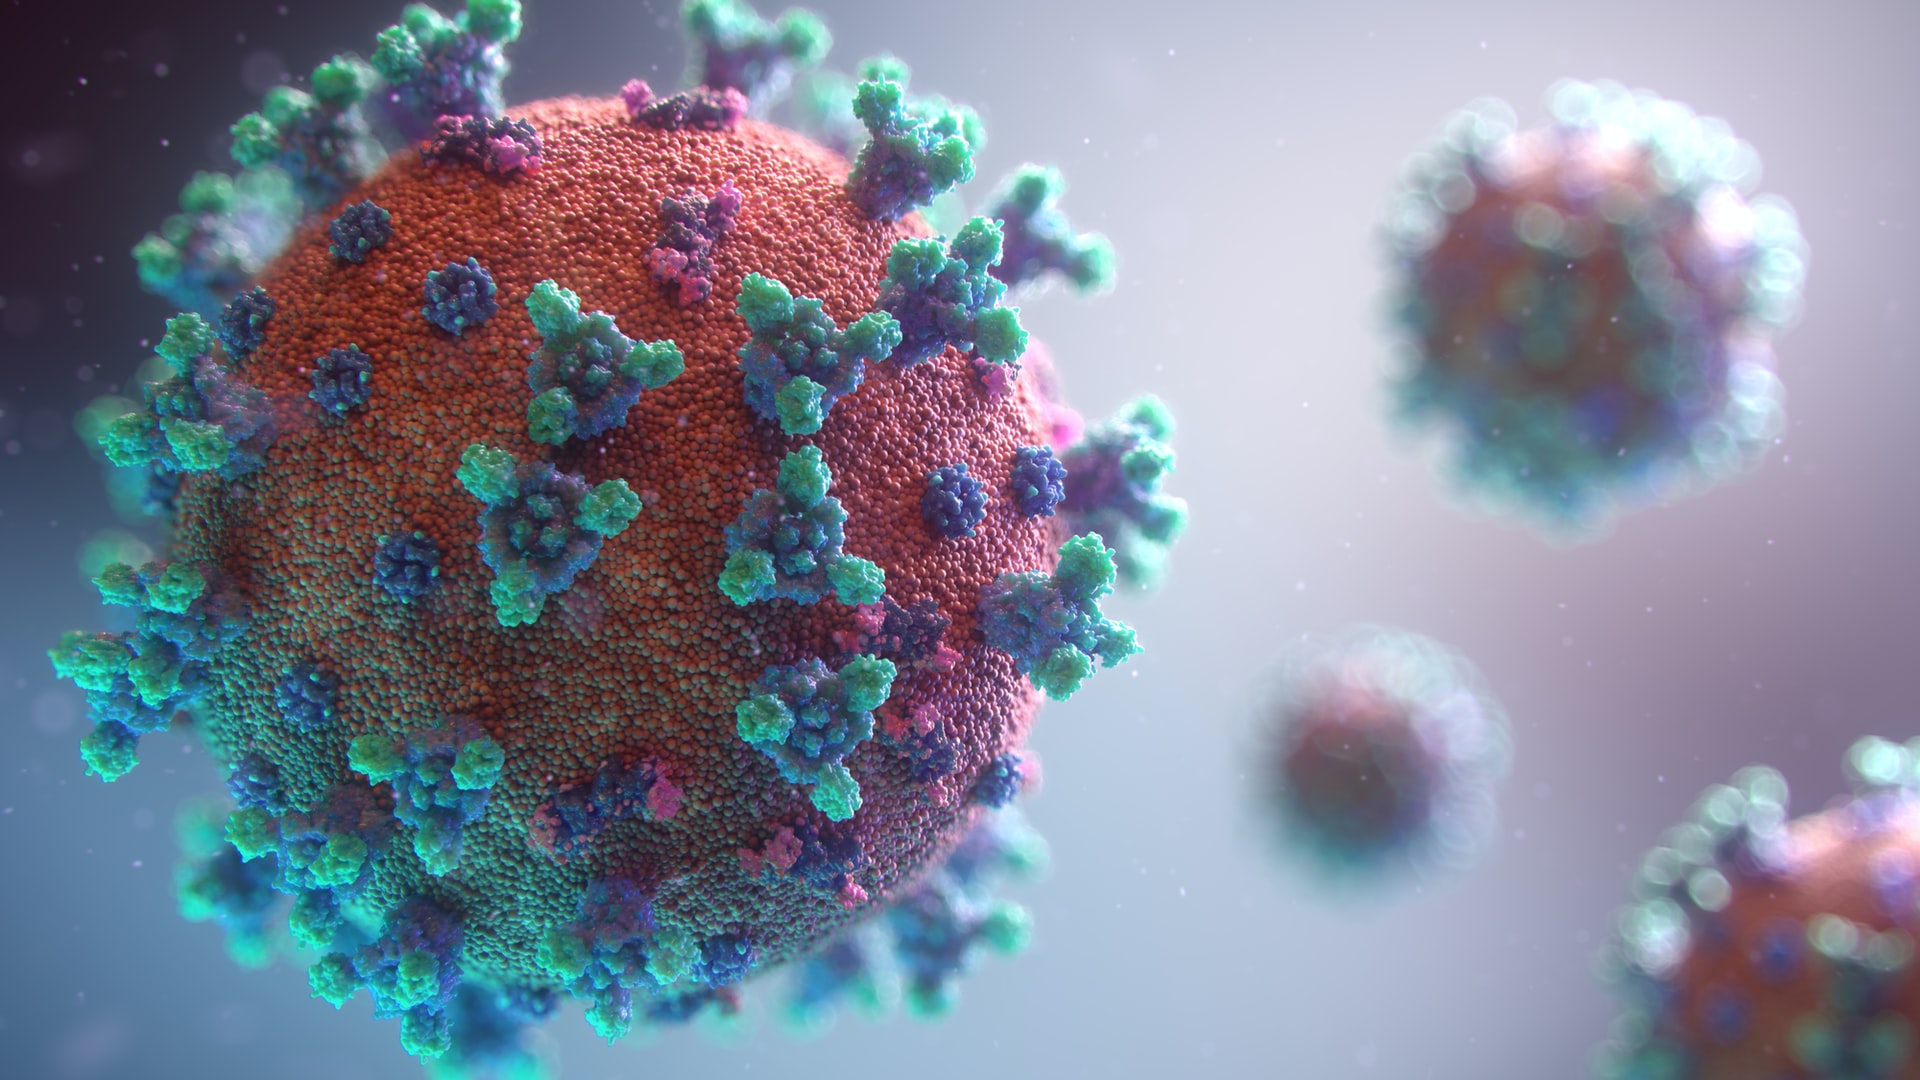 A new visualisation of the Covid-19 virus